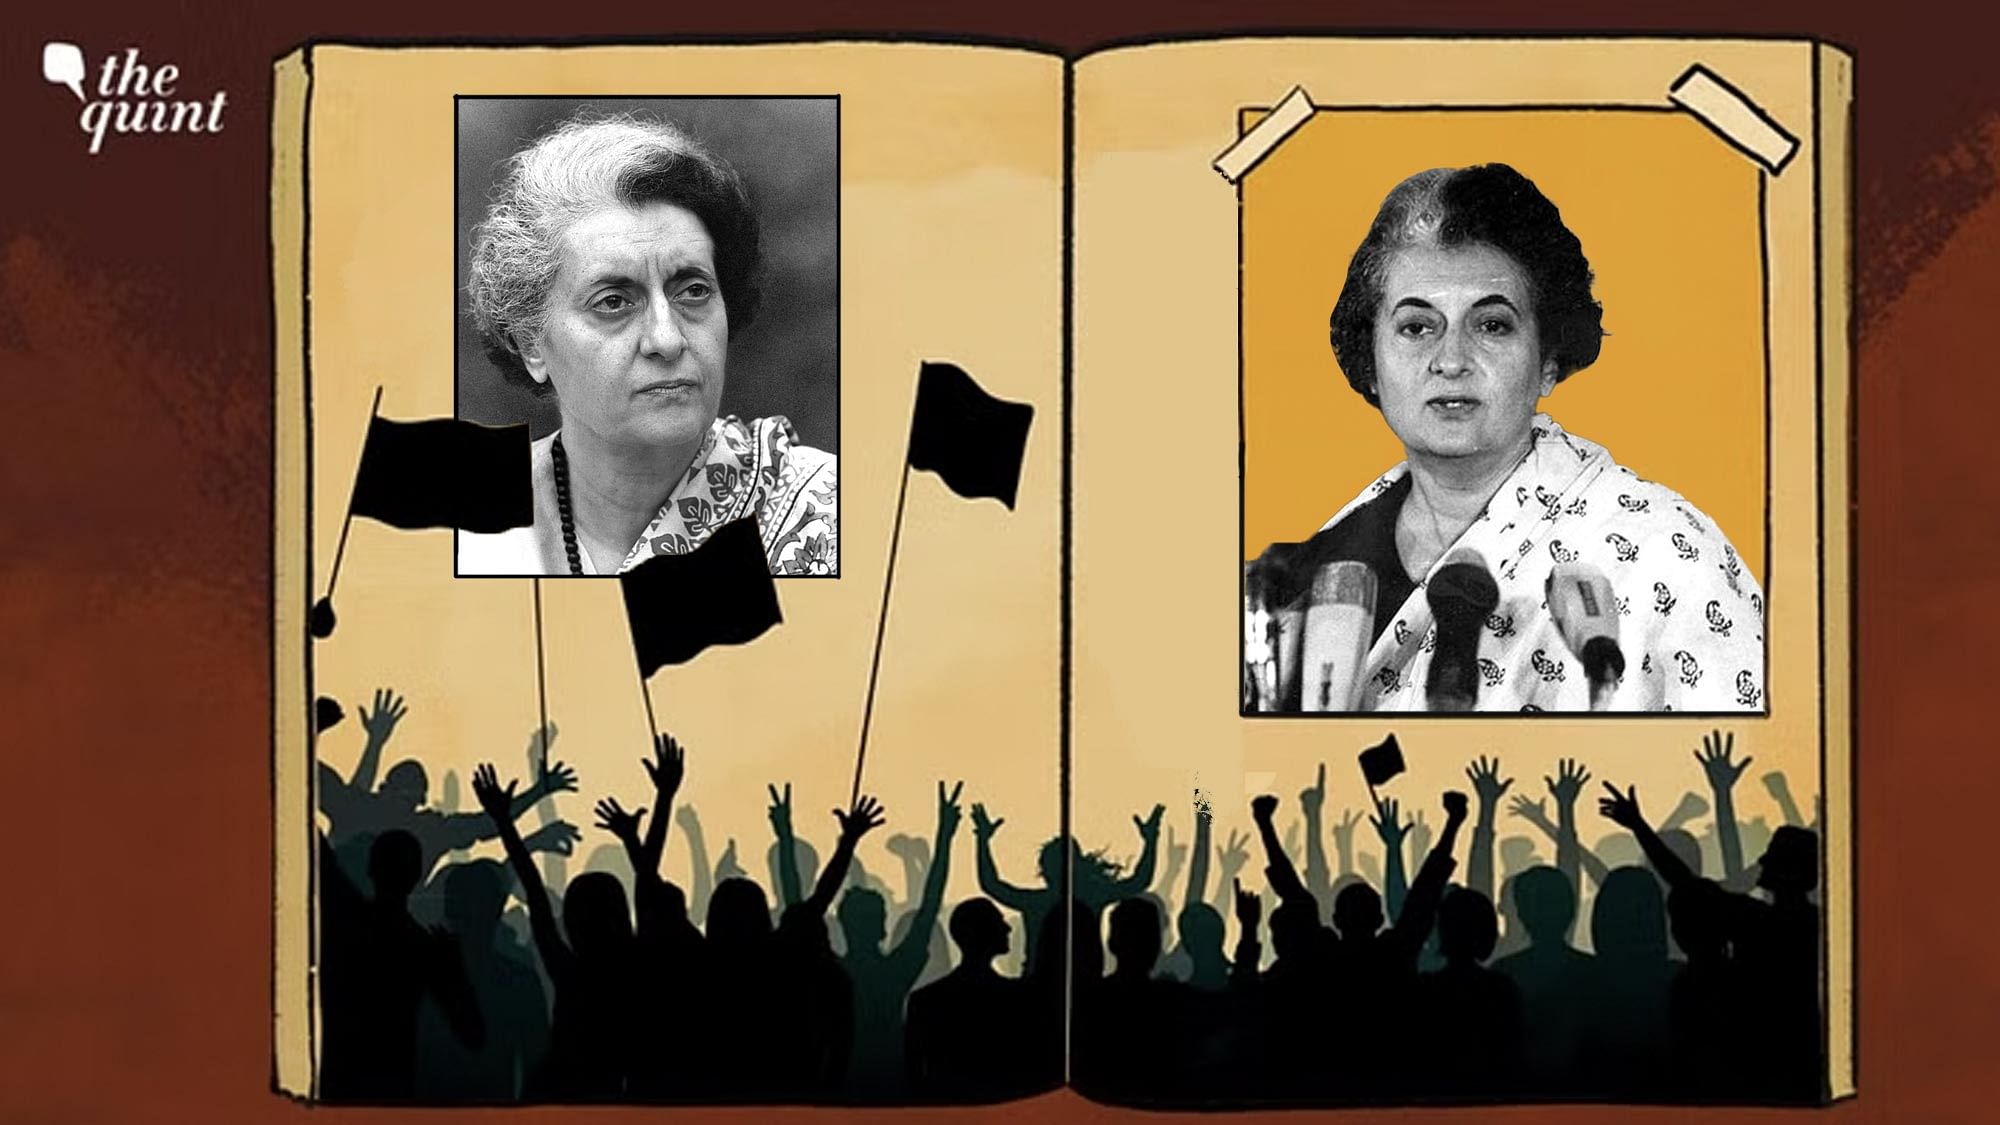 <div class="paragraphs"><p>The transformation of the late Indira Gandhi from a Goddess Durga-like figure in 1971 to an unpopular autocrat who imposed the Emergency in 1975 is a case study of historical blunders.&nbsp;</p></div>